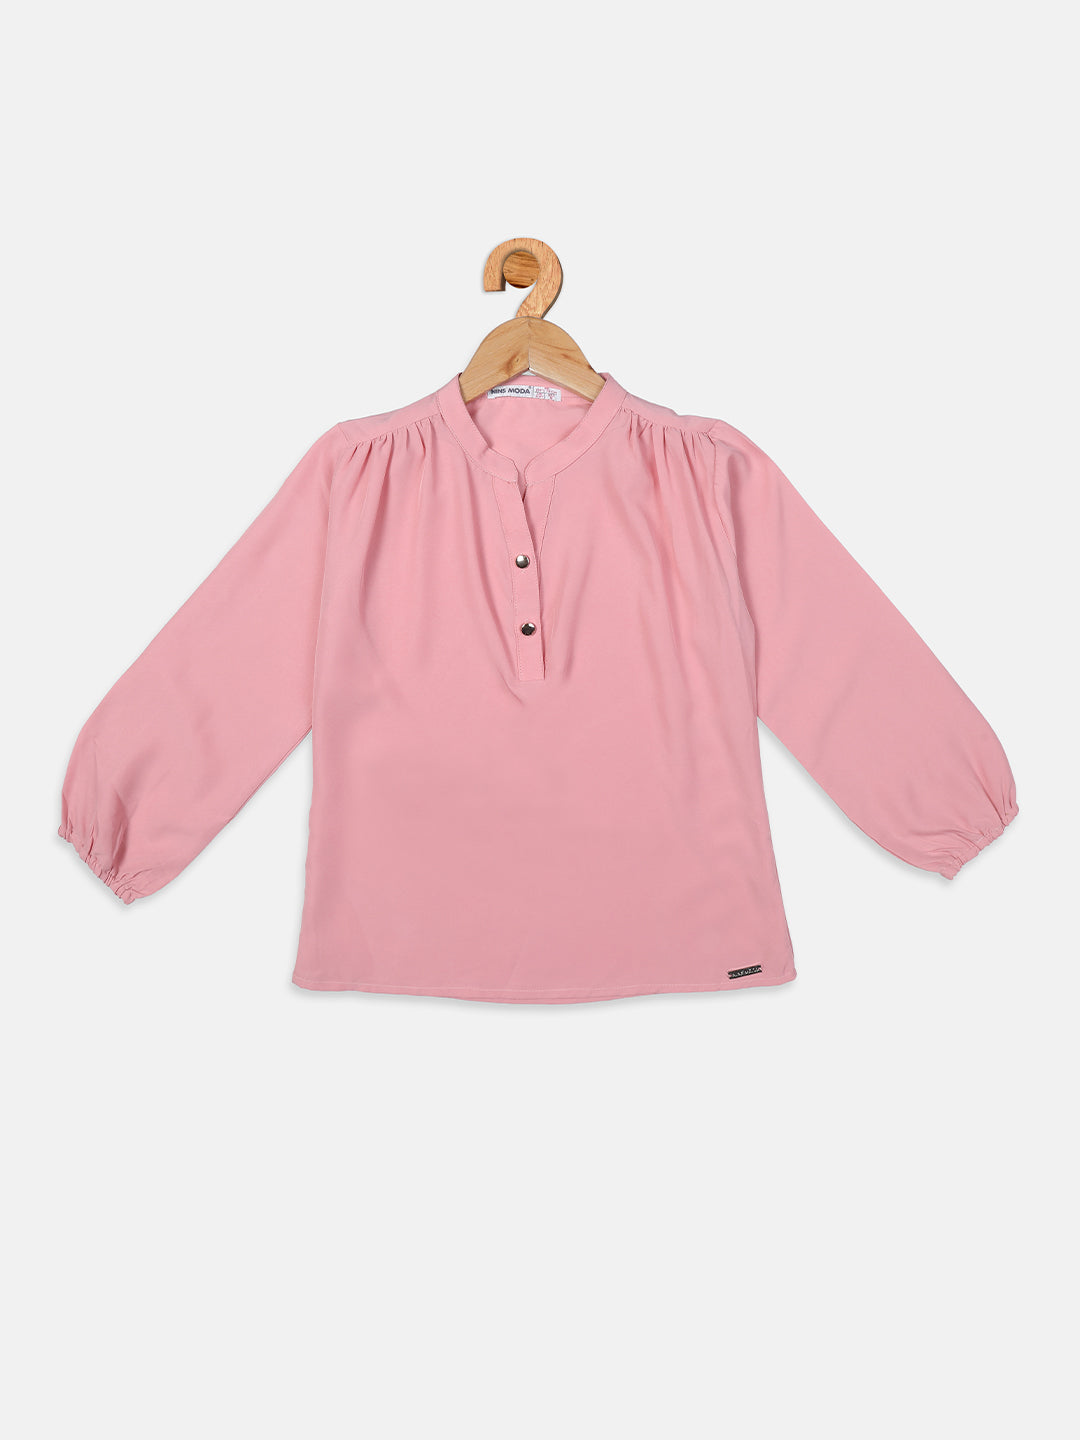 Pampolina Girls Solid Textile Top- Peach